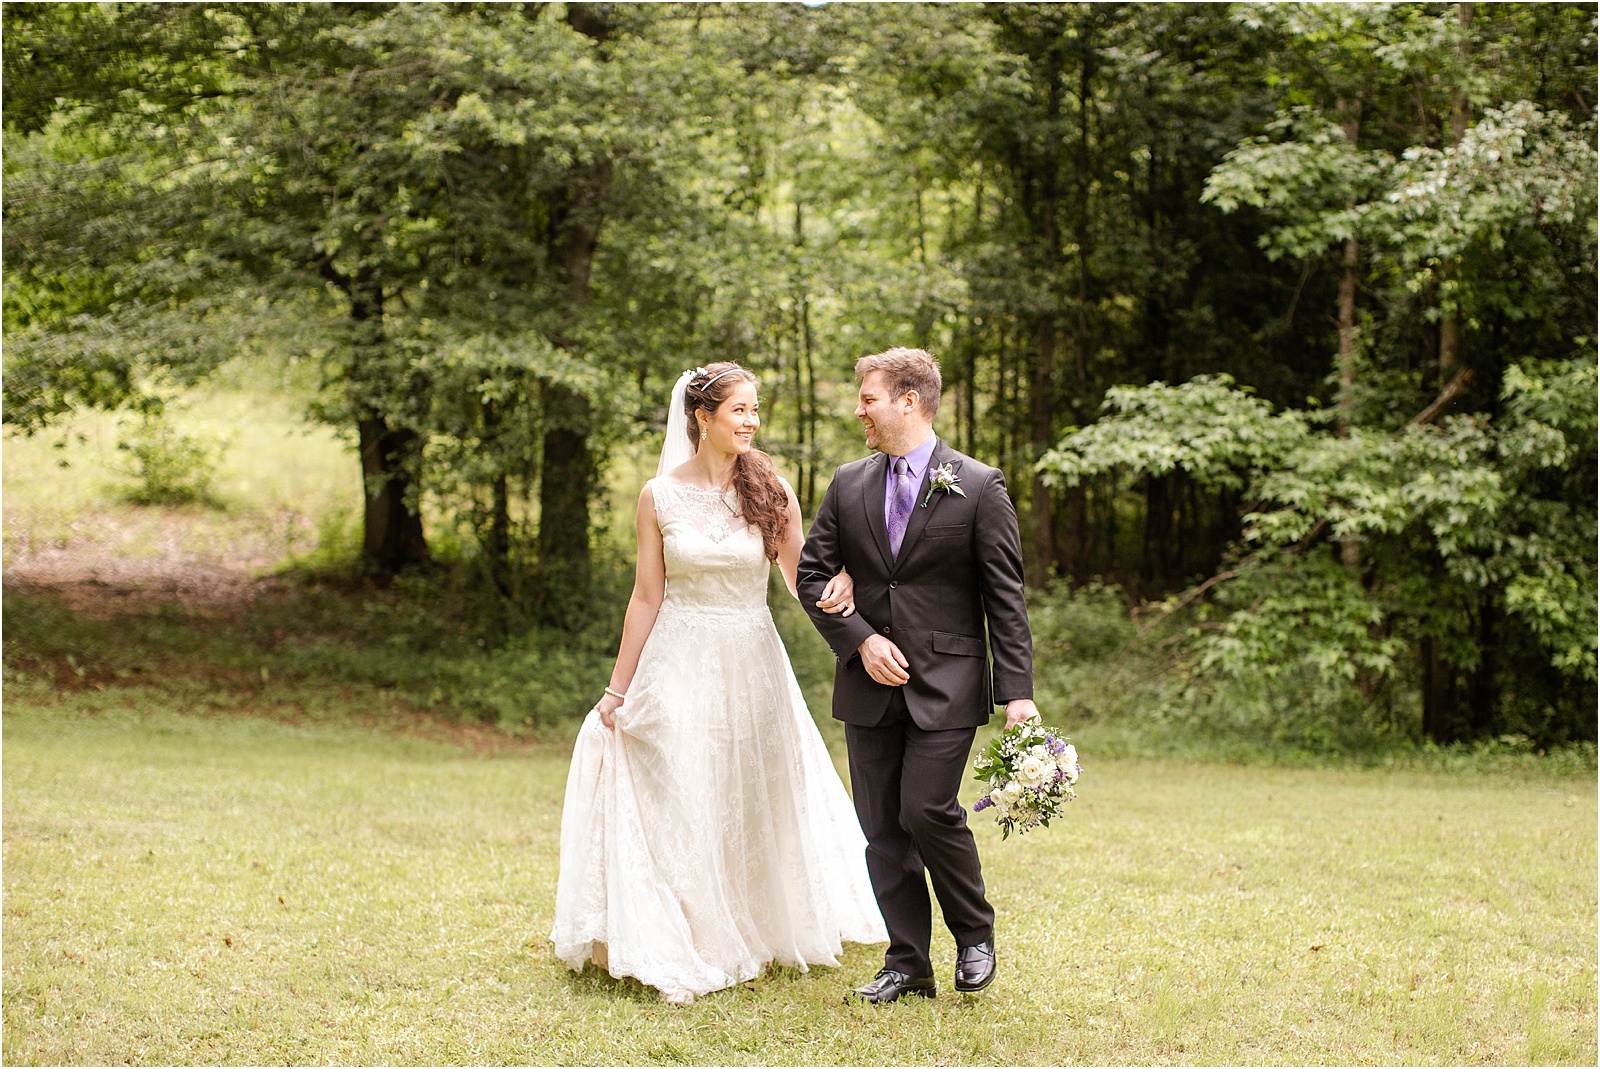 Couple walking in woods after wedding